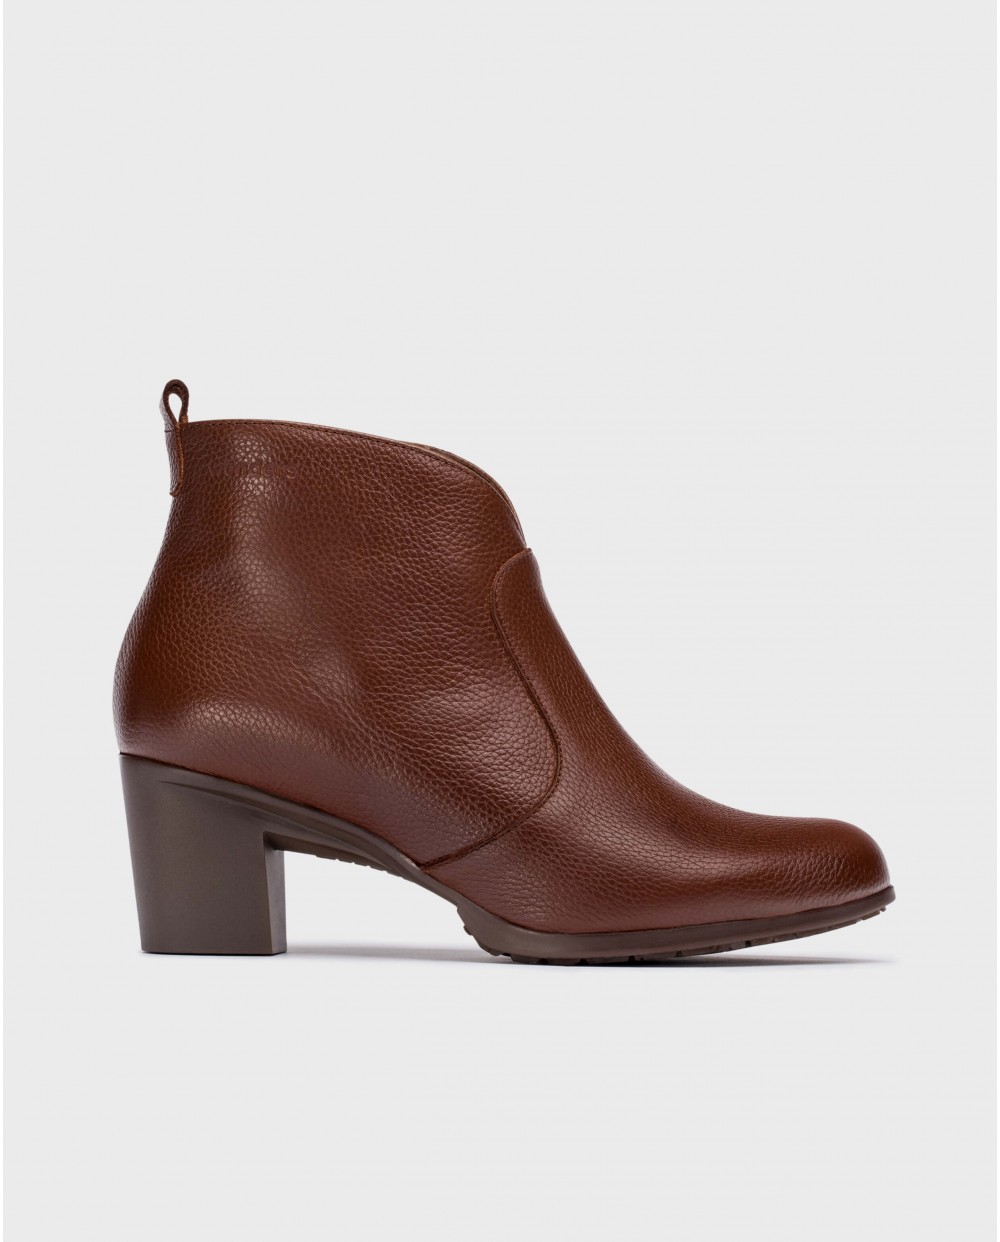 Brown textured leather ankle boot